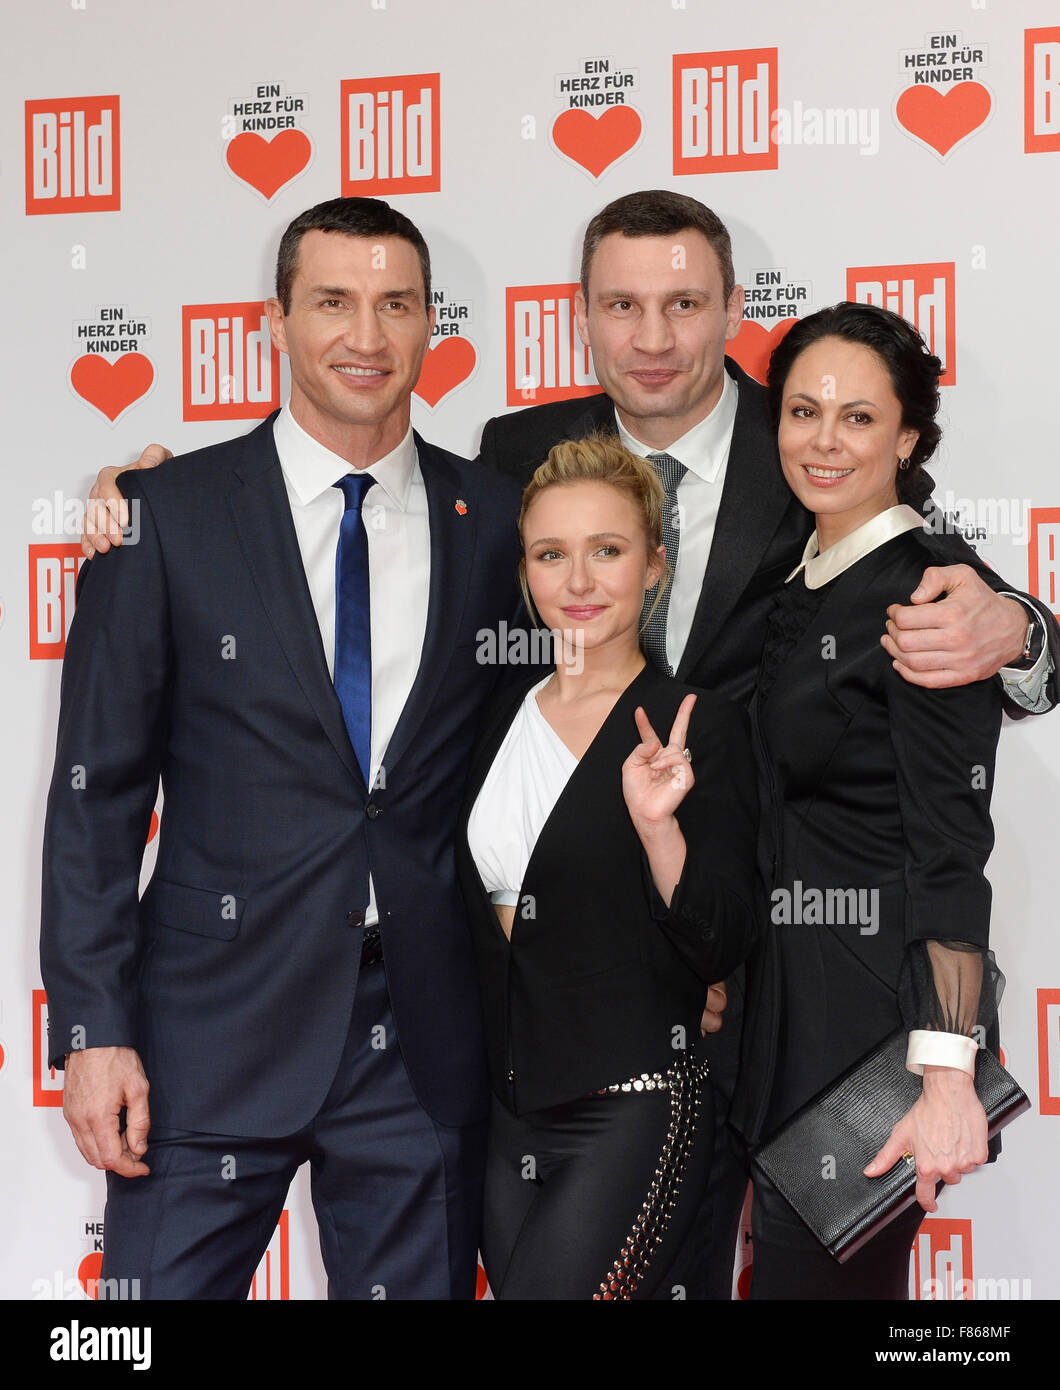 Berlin, Germany. 05th Dec, 2015. Ukrainian boxer Wladimir Klitschko (L) with his girlfriend US actress Hayden Panettiere (2nd L) and the former boxer Ukrainian Vitali Klitschko (R) and his wife Natalia (2nd R) arrive at the 'Ein Herz fuer Kinder' (lit. A Heart for Children) fundraising gala in Berlin, Germany, 05 December 2015. The gala is broadcast live on ZDF. Photo: Joerg Carstensen/dpa/Alamy Live News Stock Photo